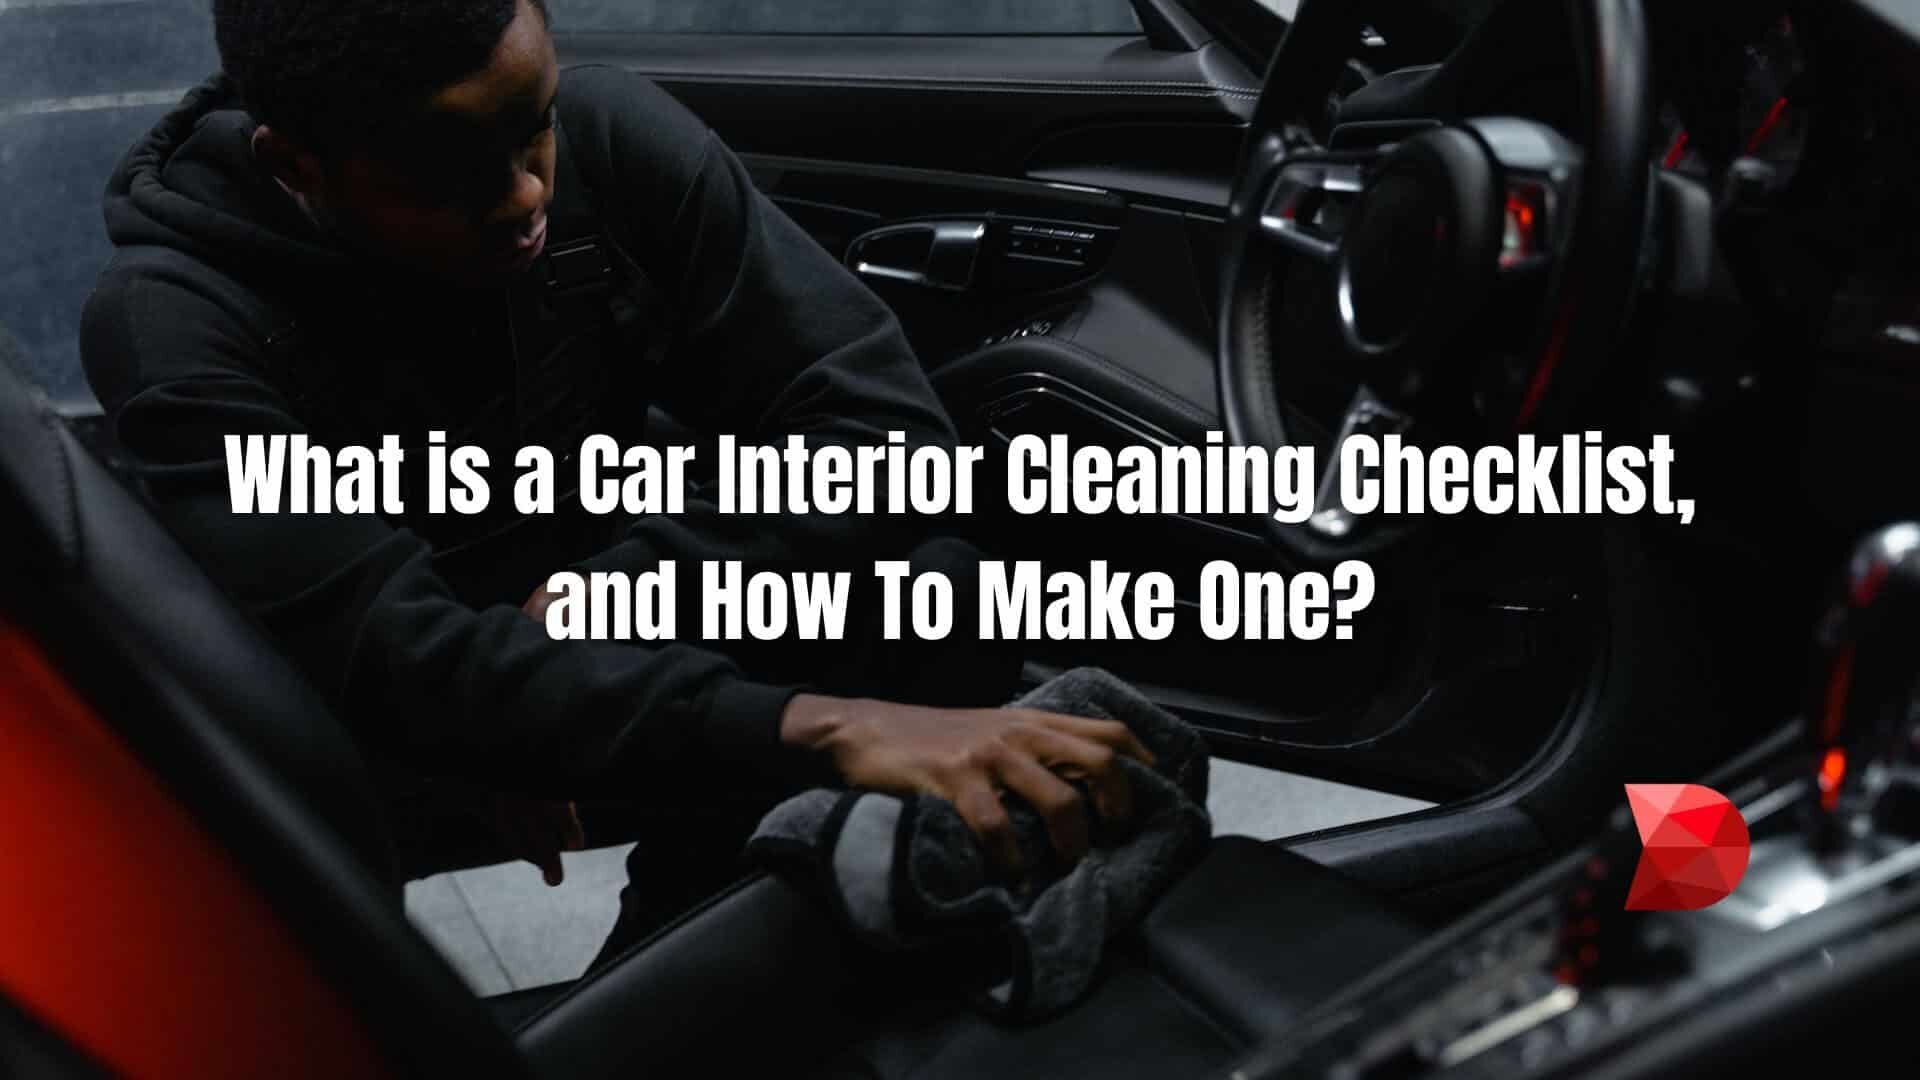 What is a Car Interior Cleaning Checklist? - DataMyte